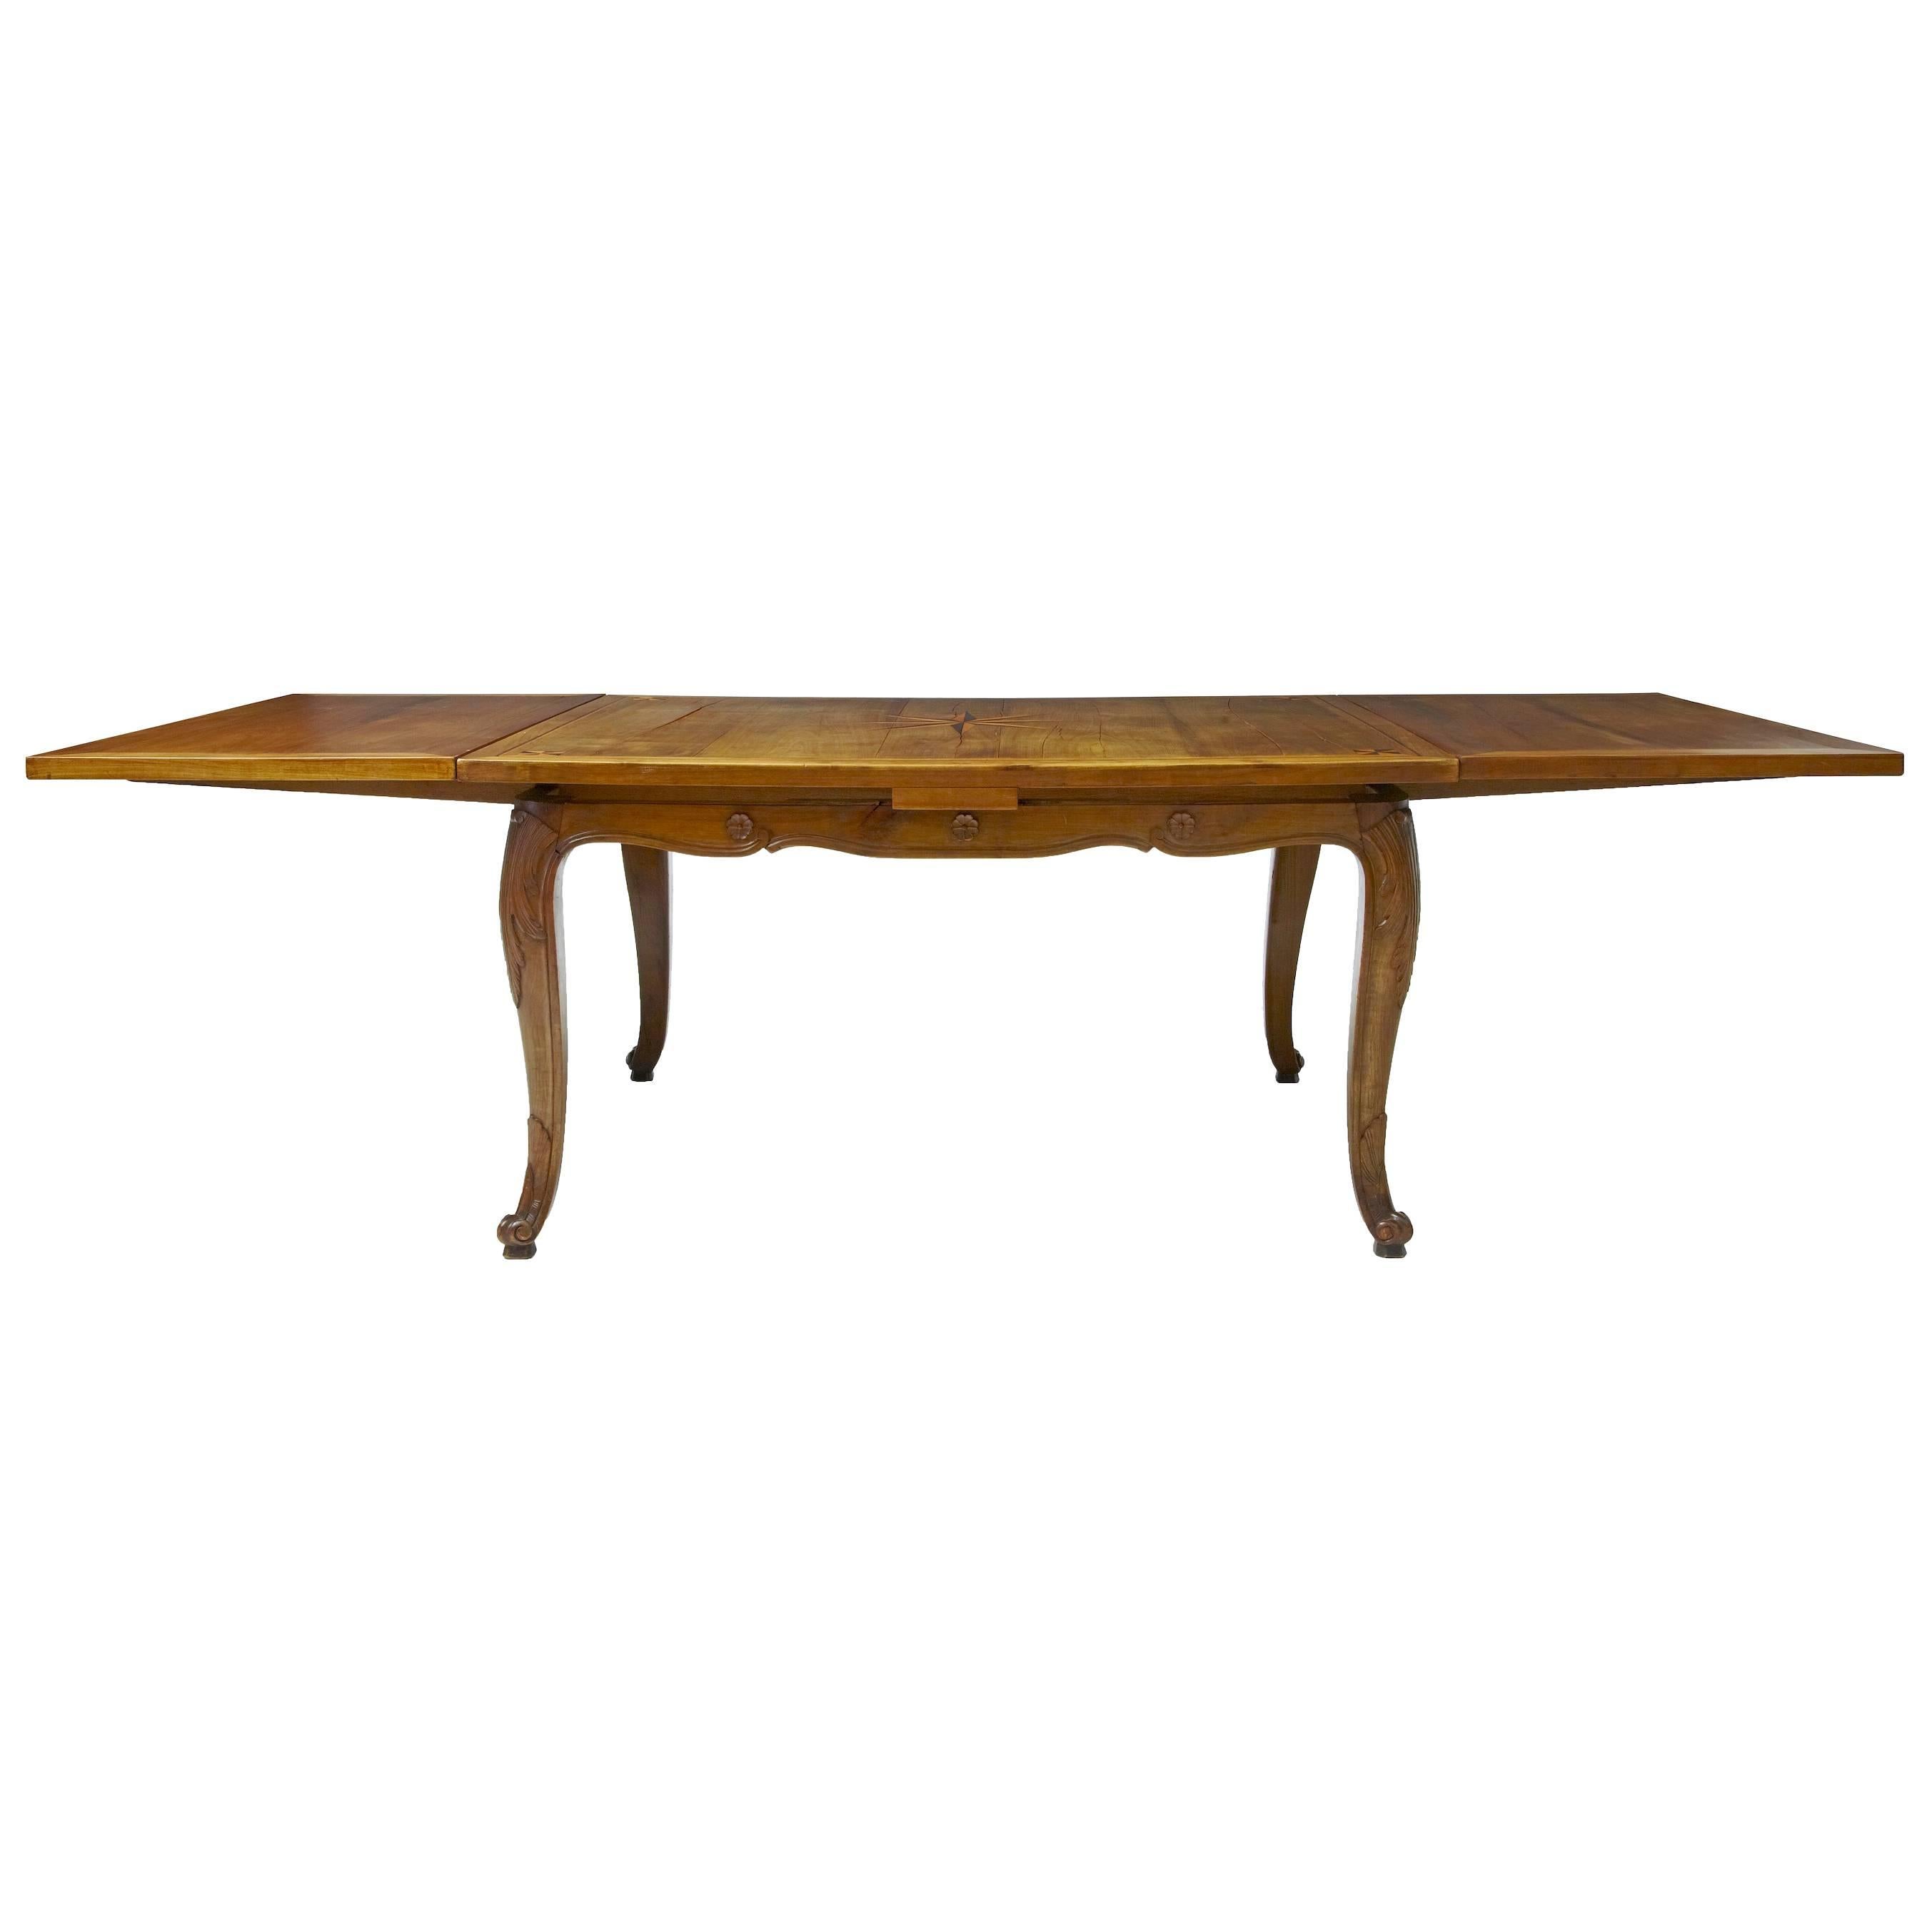 19th Century French Inlaid Fruitwood Draw-Leaf Dining Table